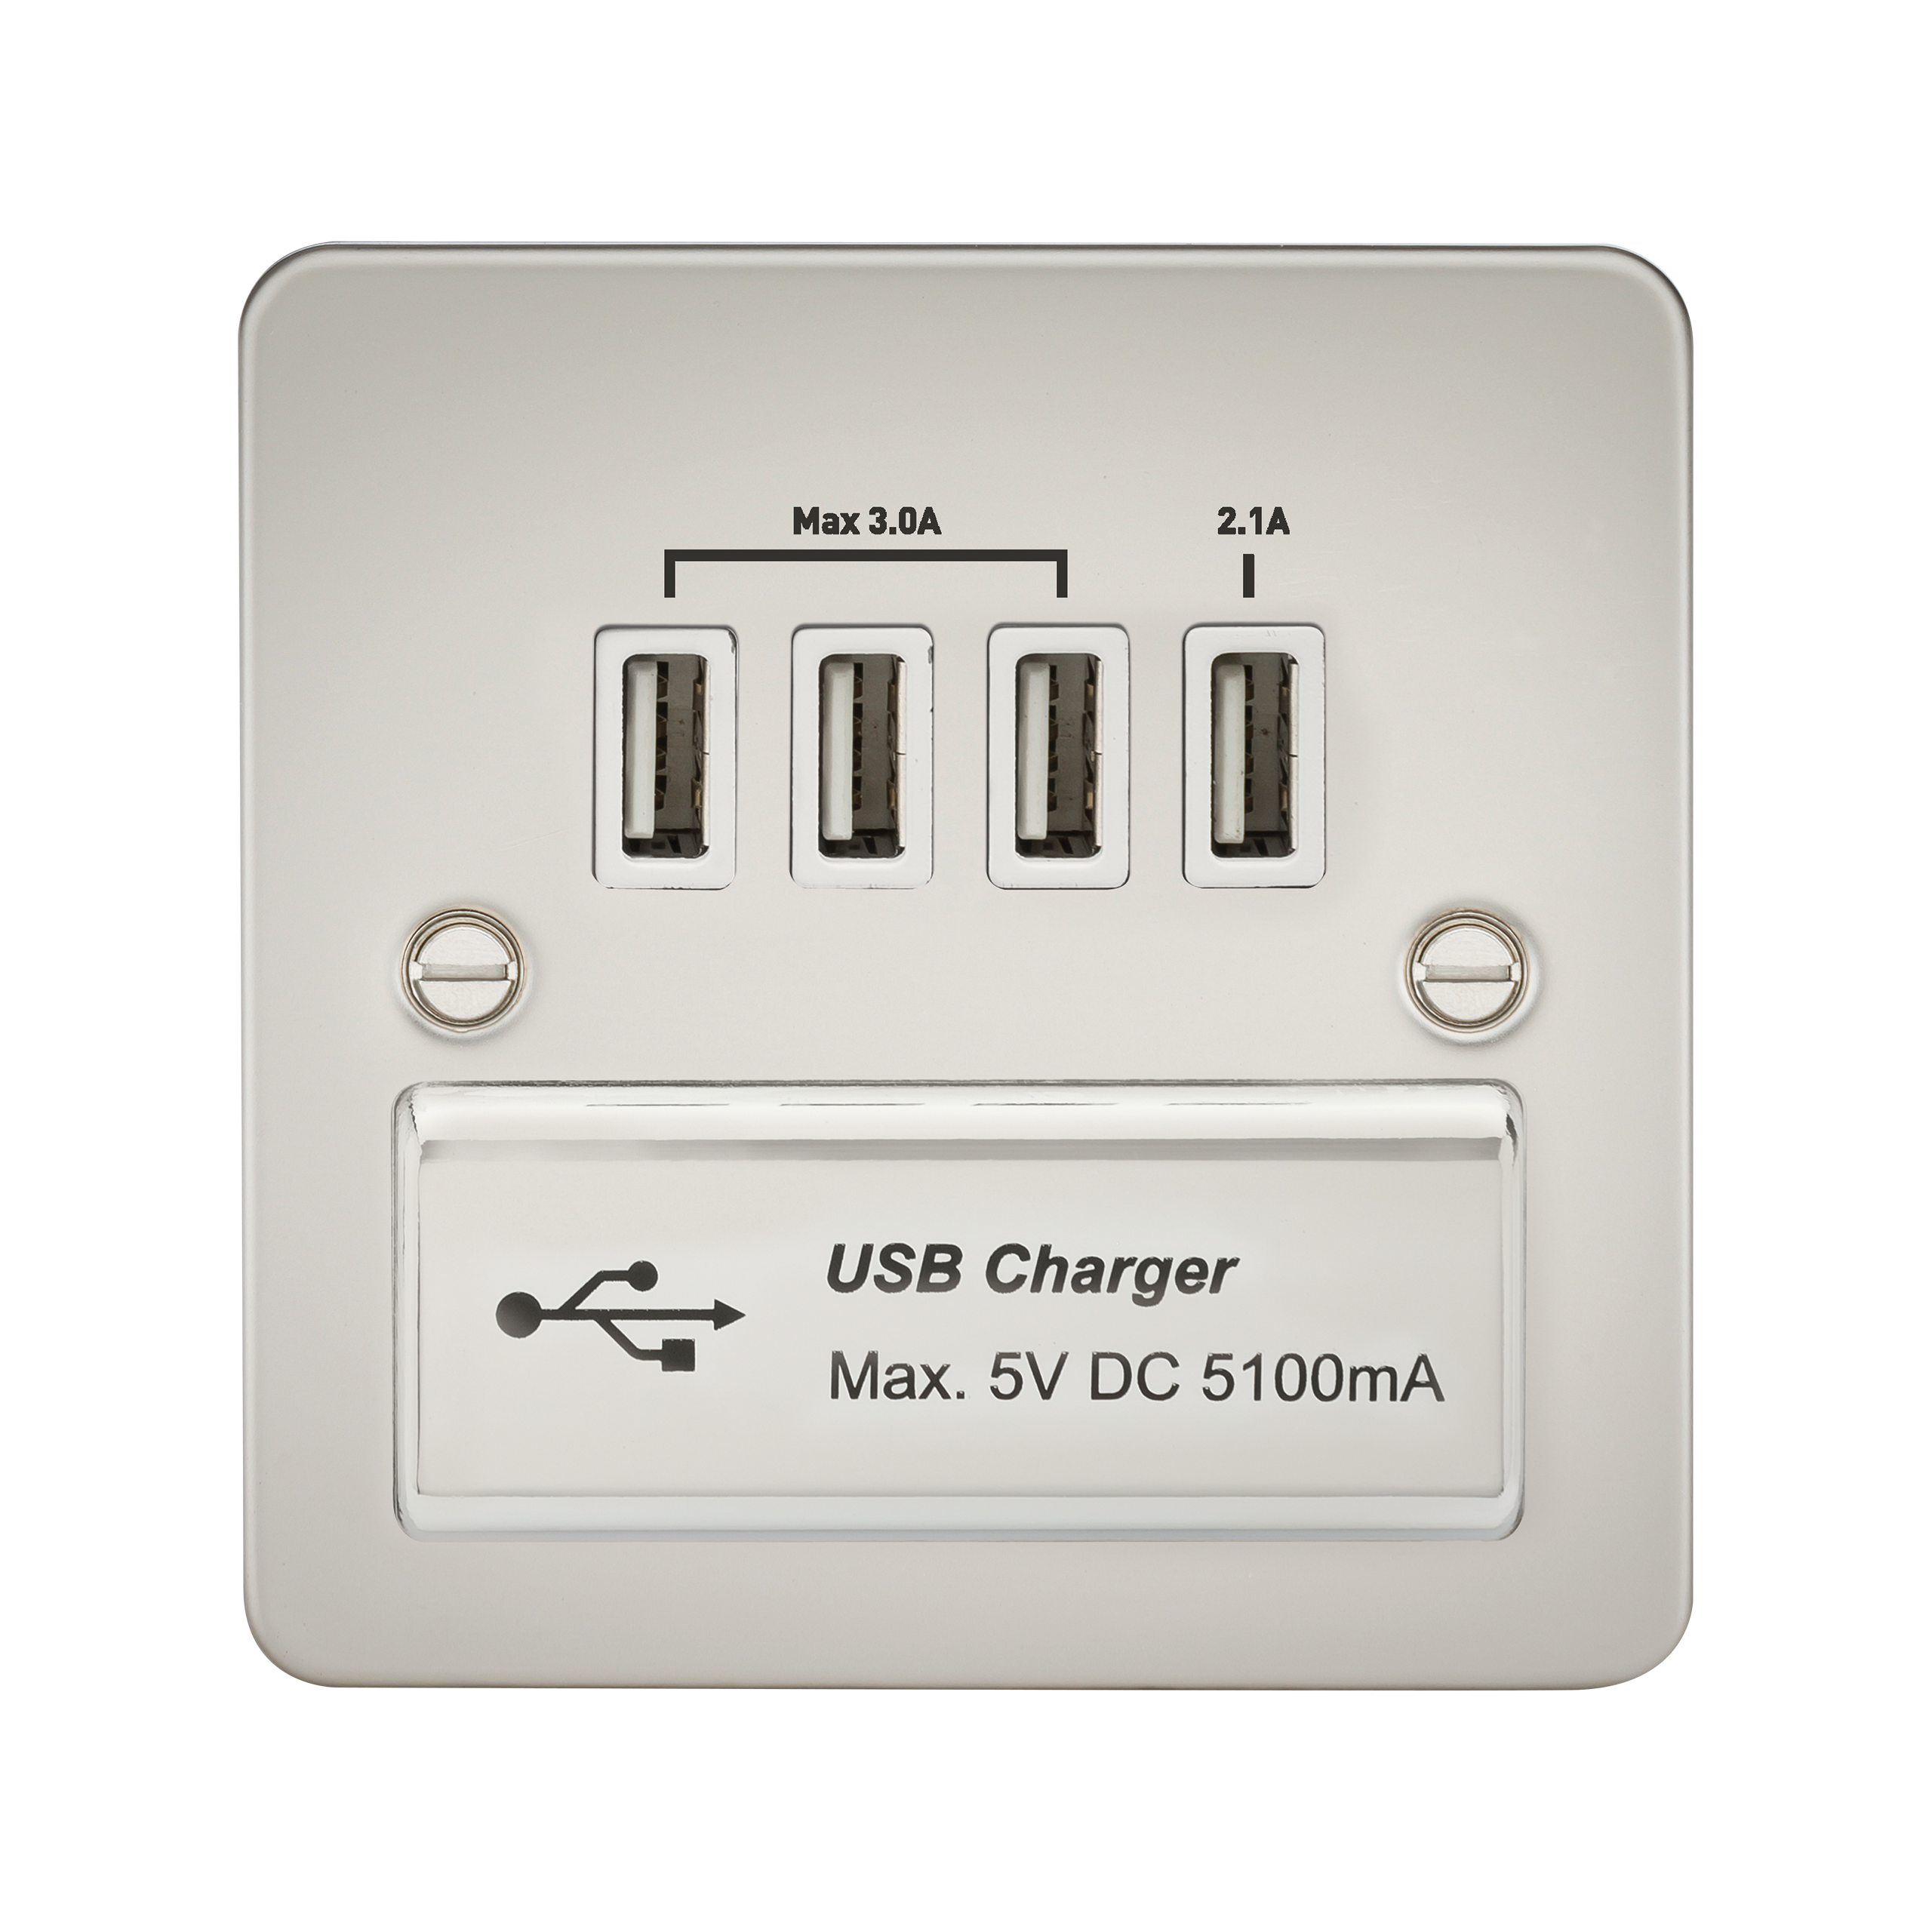 Flat Plate Quad USB Charger Outlet - Pearl With White Insert - FPQUADPLW 